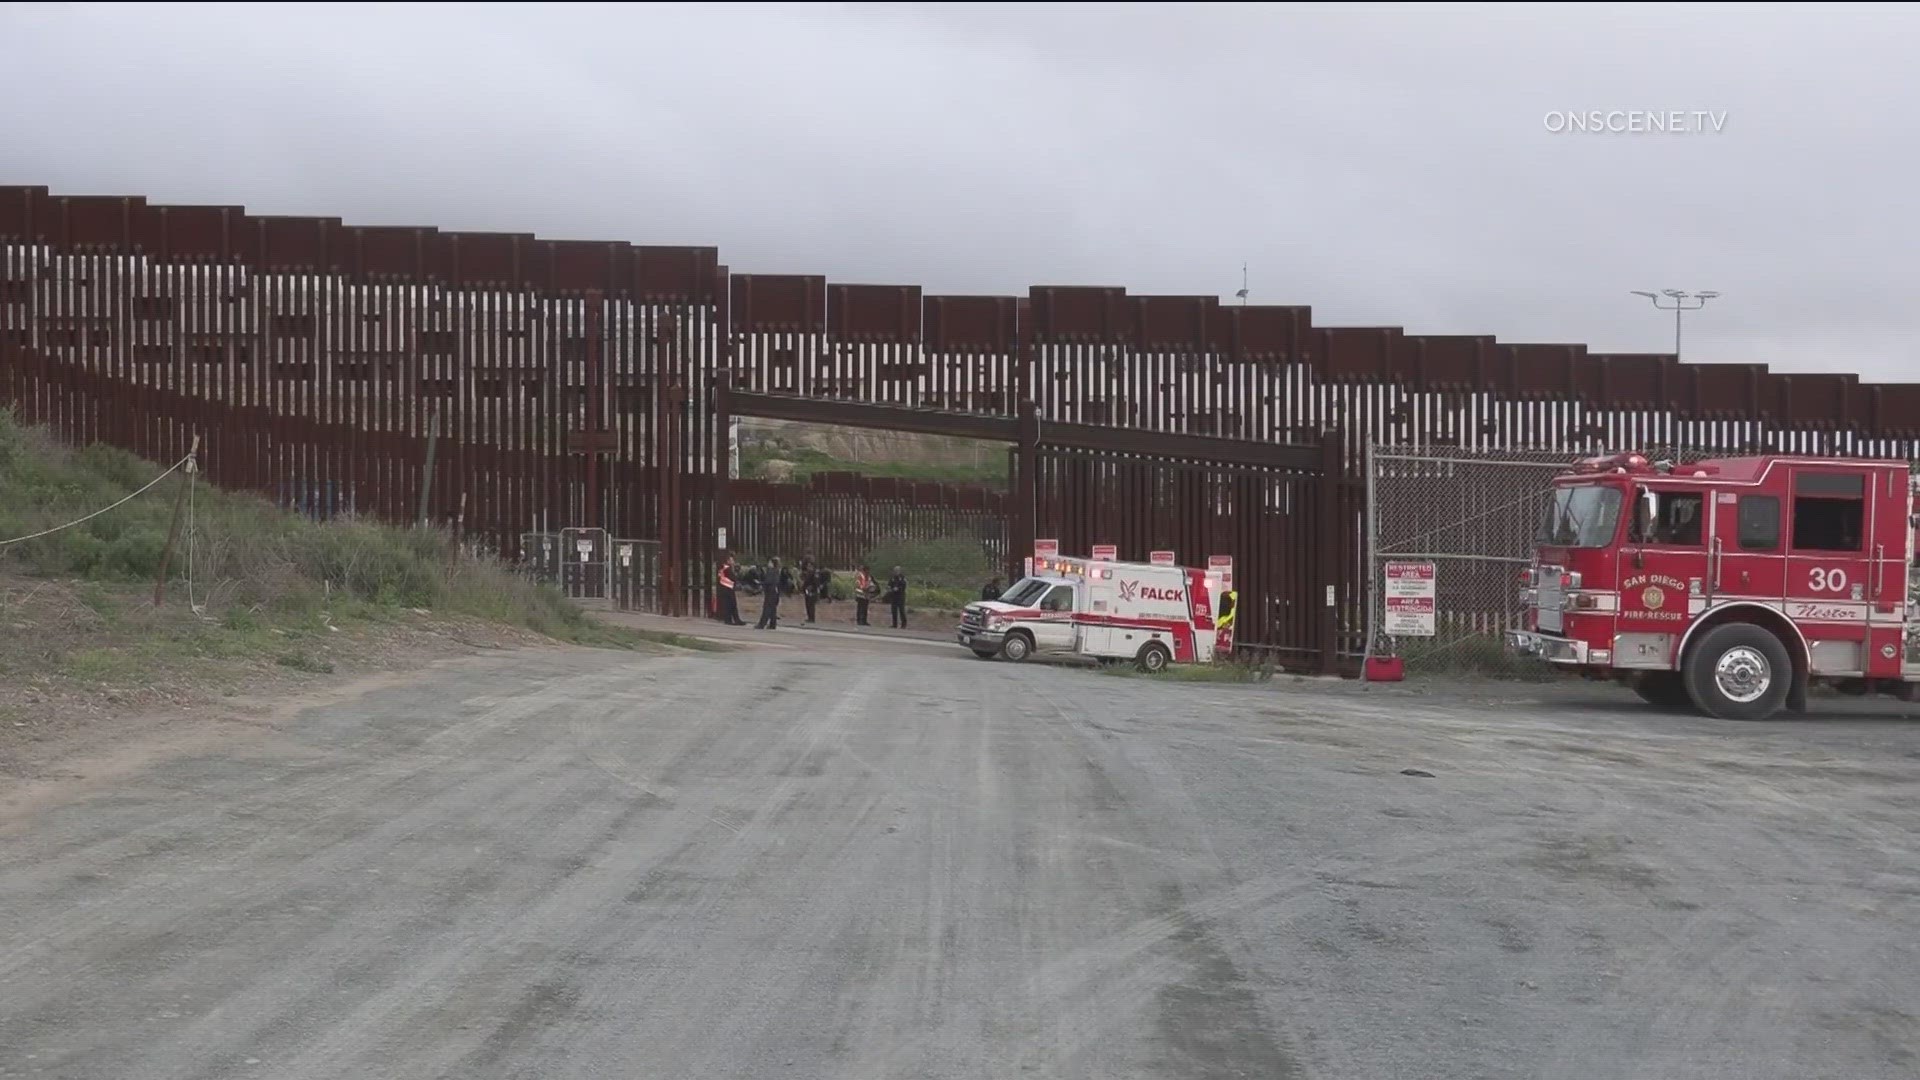 An immigration rights advocate who visits the border frequently said these types of falls happen on a daily basis.